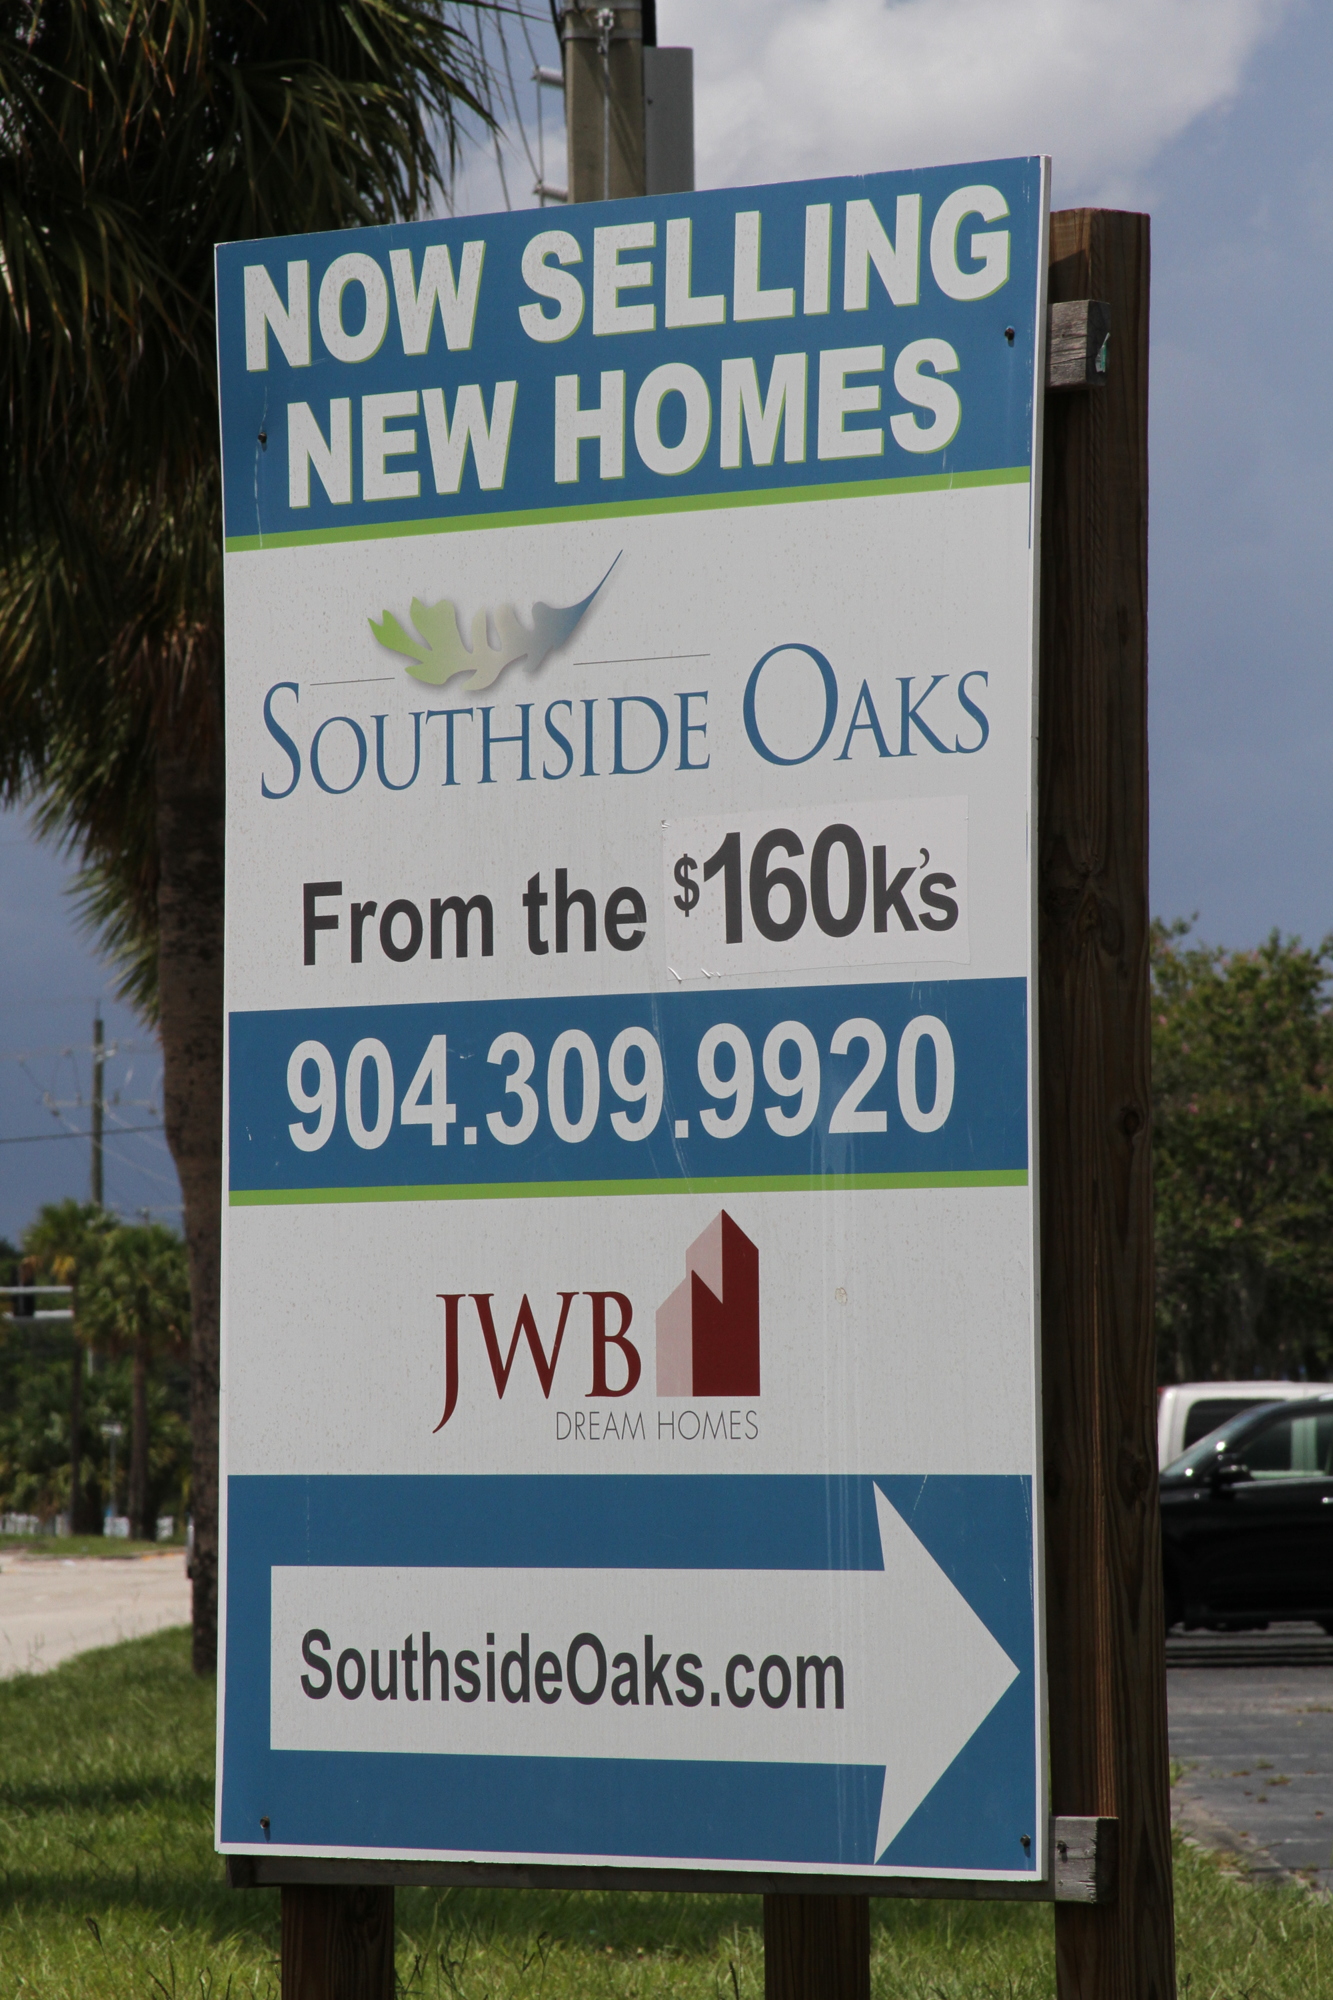 JWB Real Estate Capital has launched he company’s first subdivision, Southside Oaks, in Arlington. It sits on 13 acres of what was once a mobile home park.